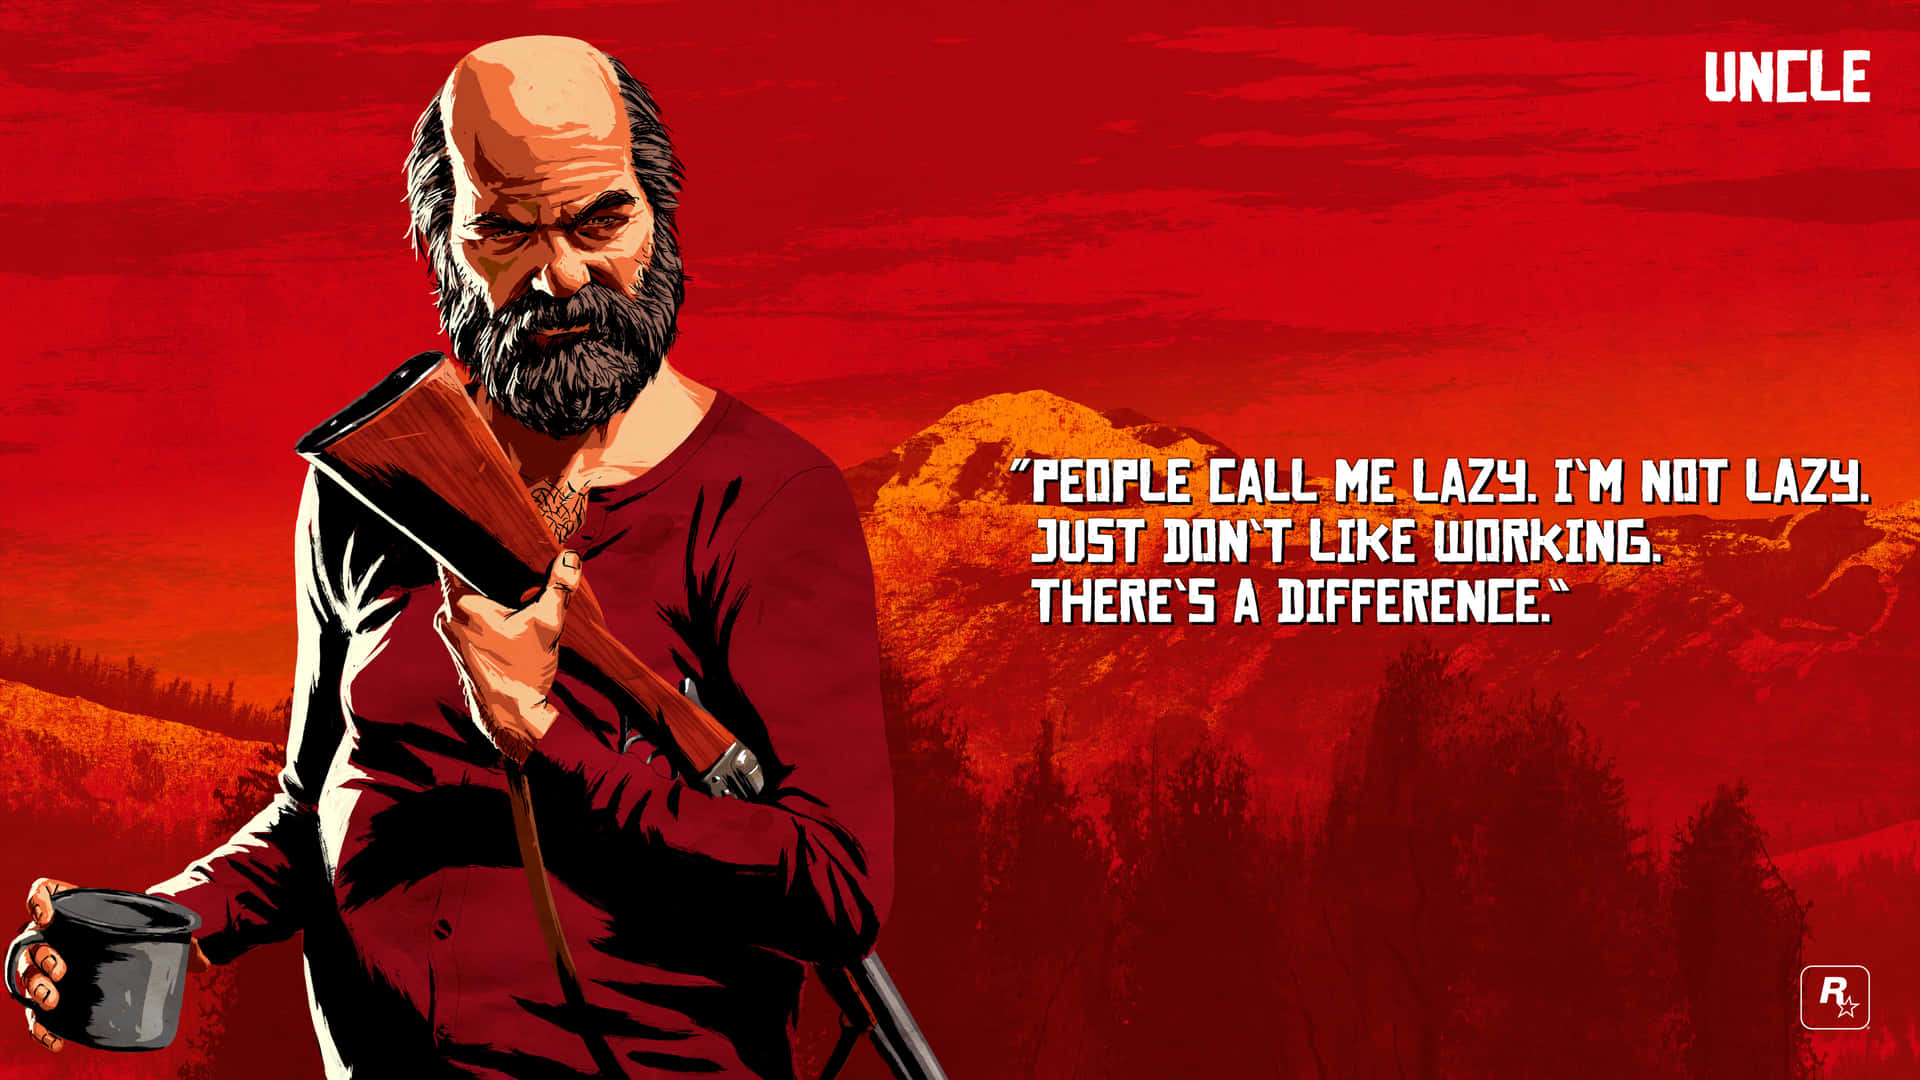 Best Red Dead Redemption 2 Uncle Quote About Laziness Background